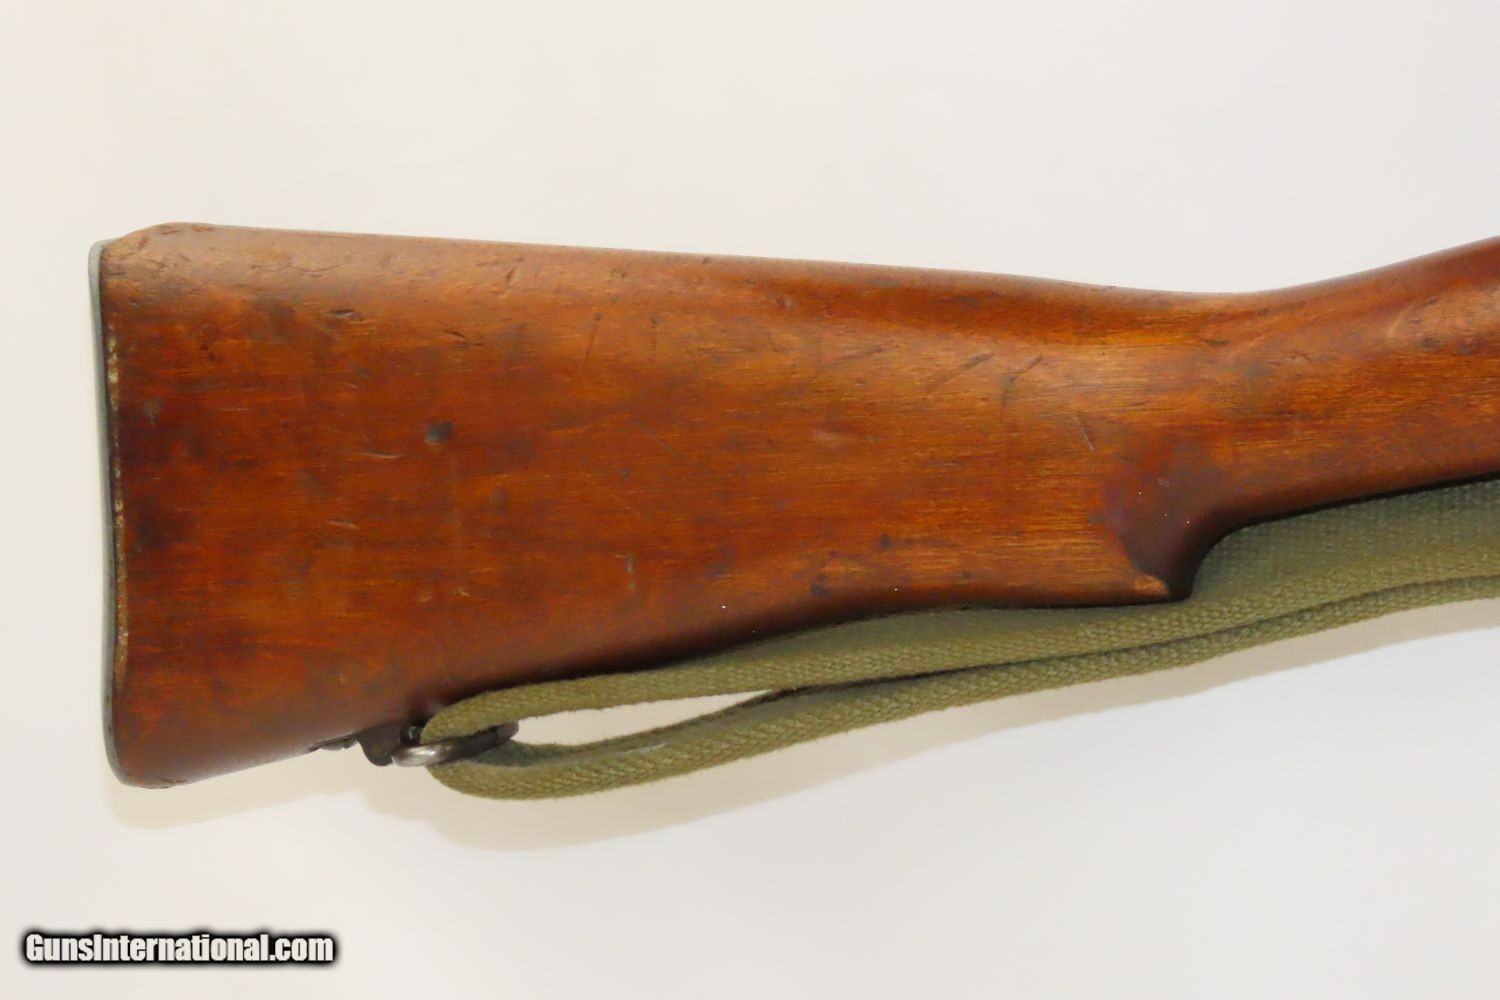 Excellent Lend-Lease Savage WWII Enfield No. 4 Mk1-SN 420687